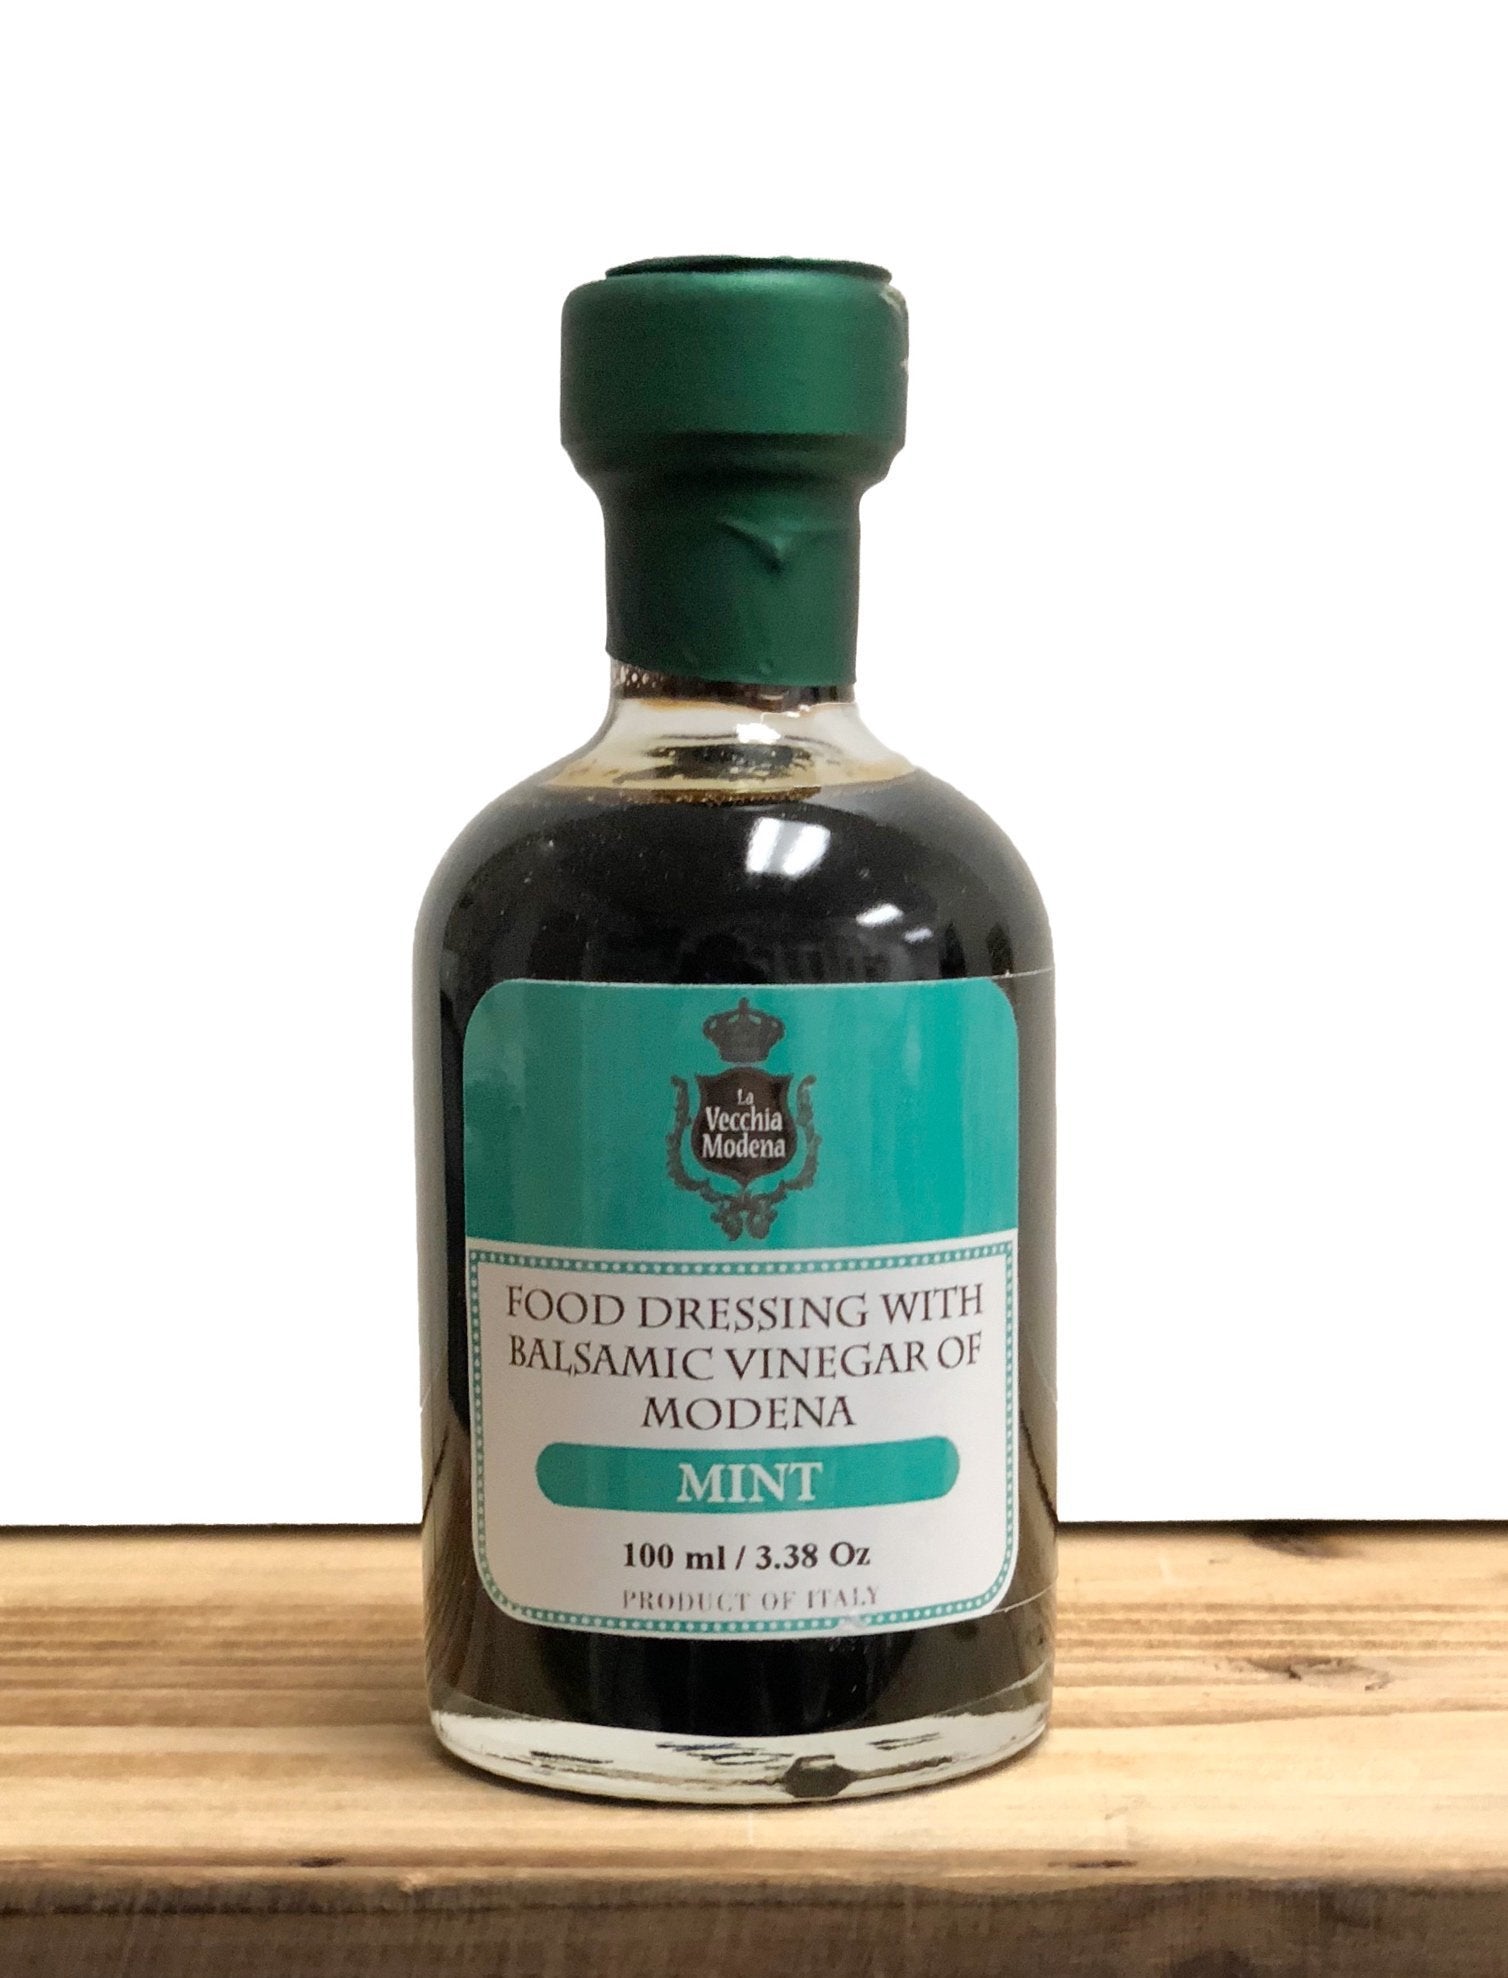 Balsamic Vinegar Of Modena with Mint